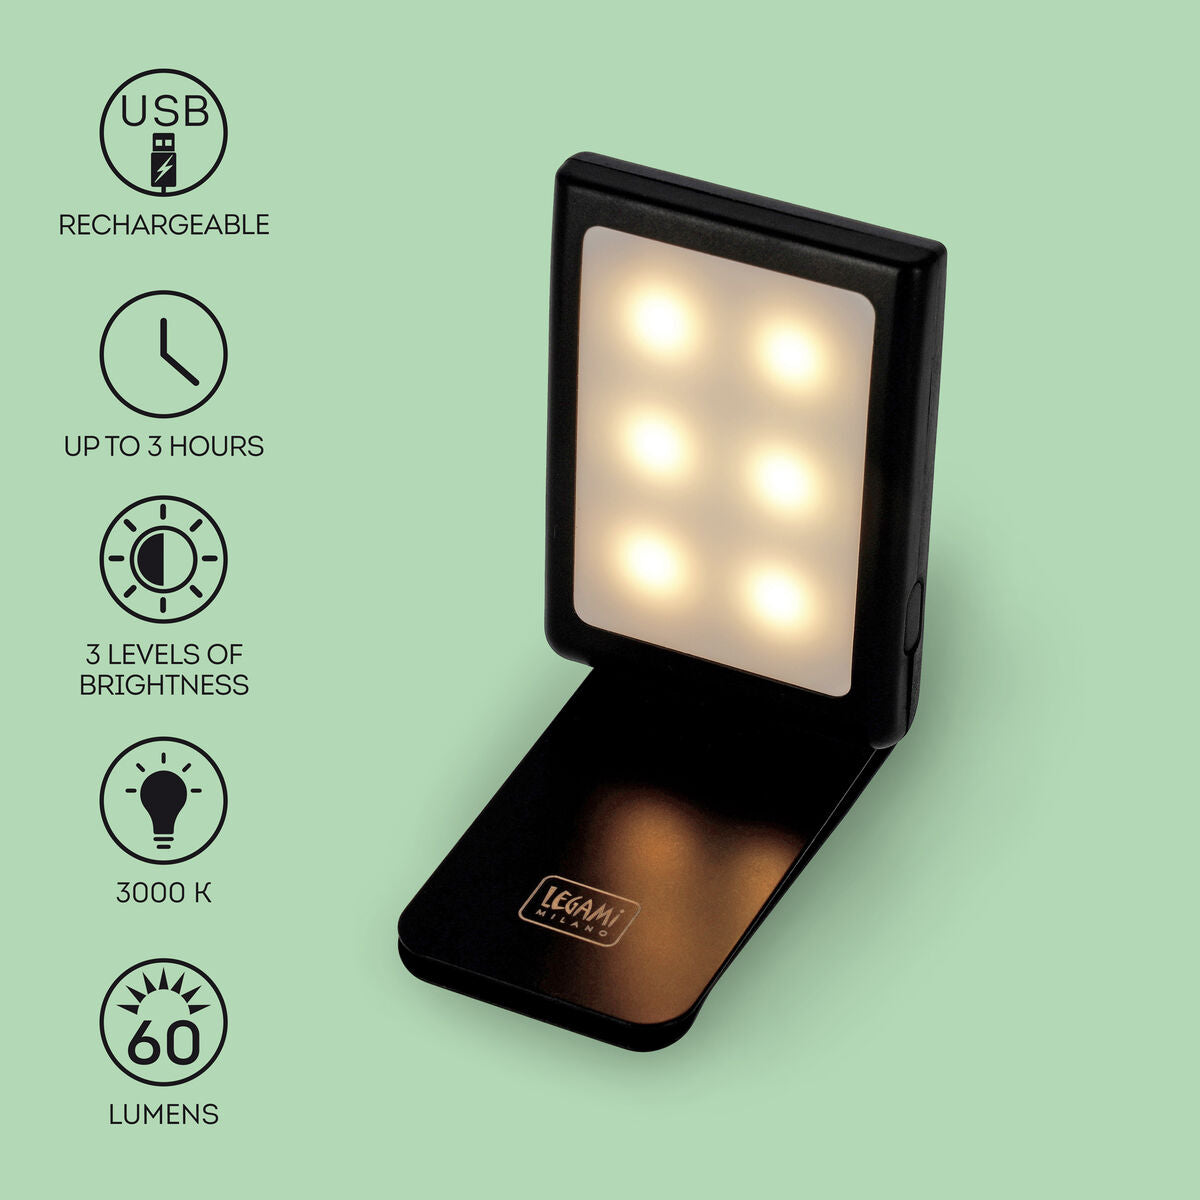 Clever Gadgets | Legami Rechargable Led Reading Light by Weirs of Baggot Street